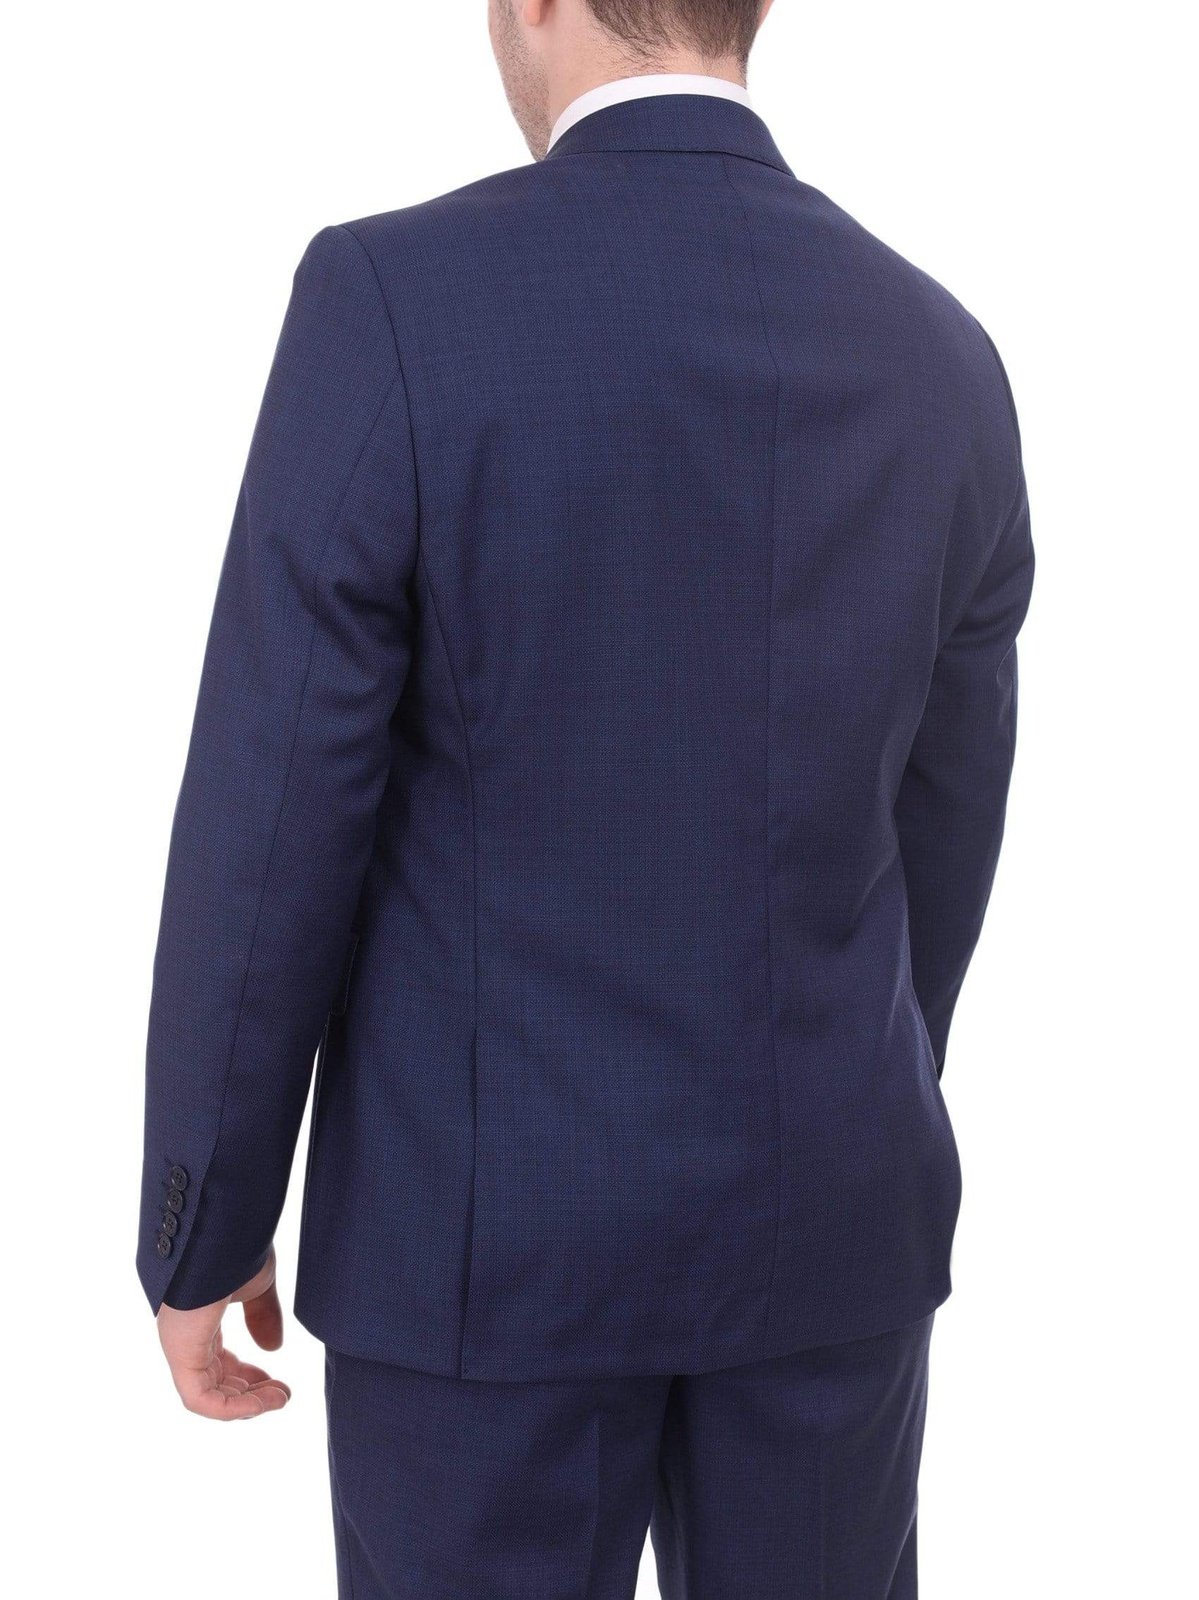 Label E TWO PIECE SUITS Mens Modern Fit Blue Textured Two Button Wool Suit